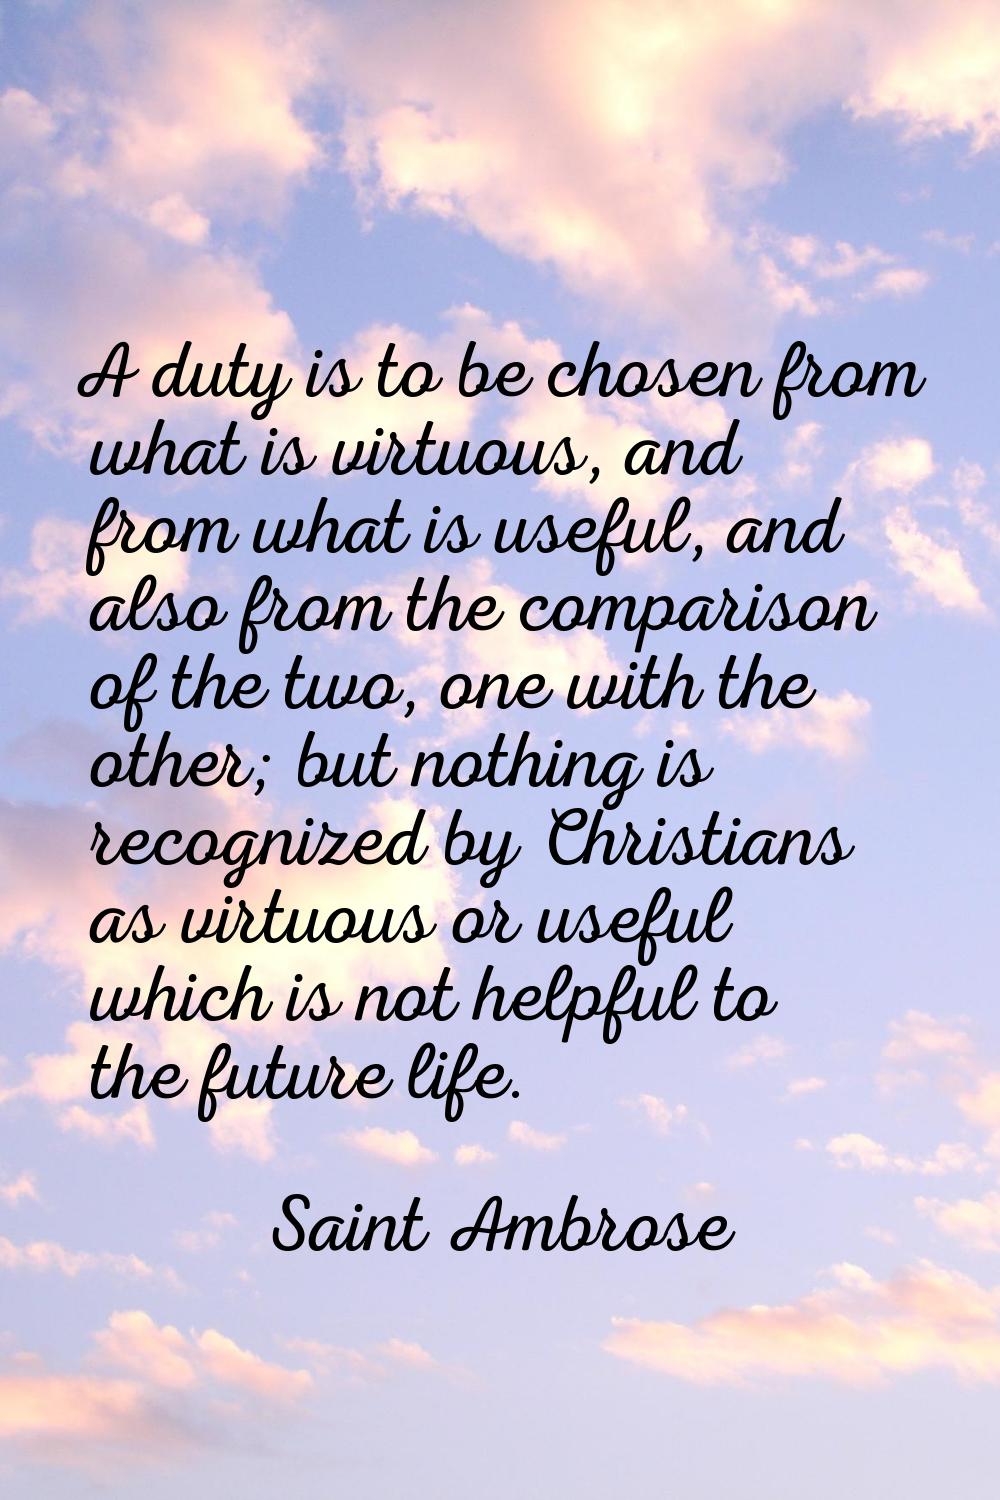 A duty is to be chosen from what is virtuous, and from what is useful, and also from the comparison